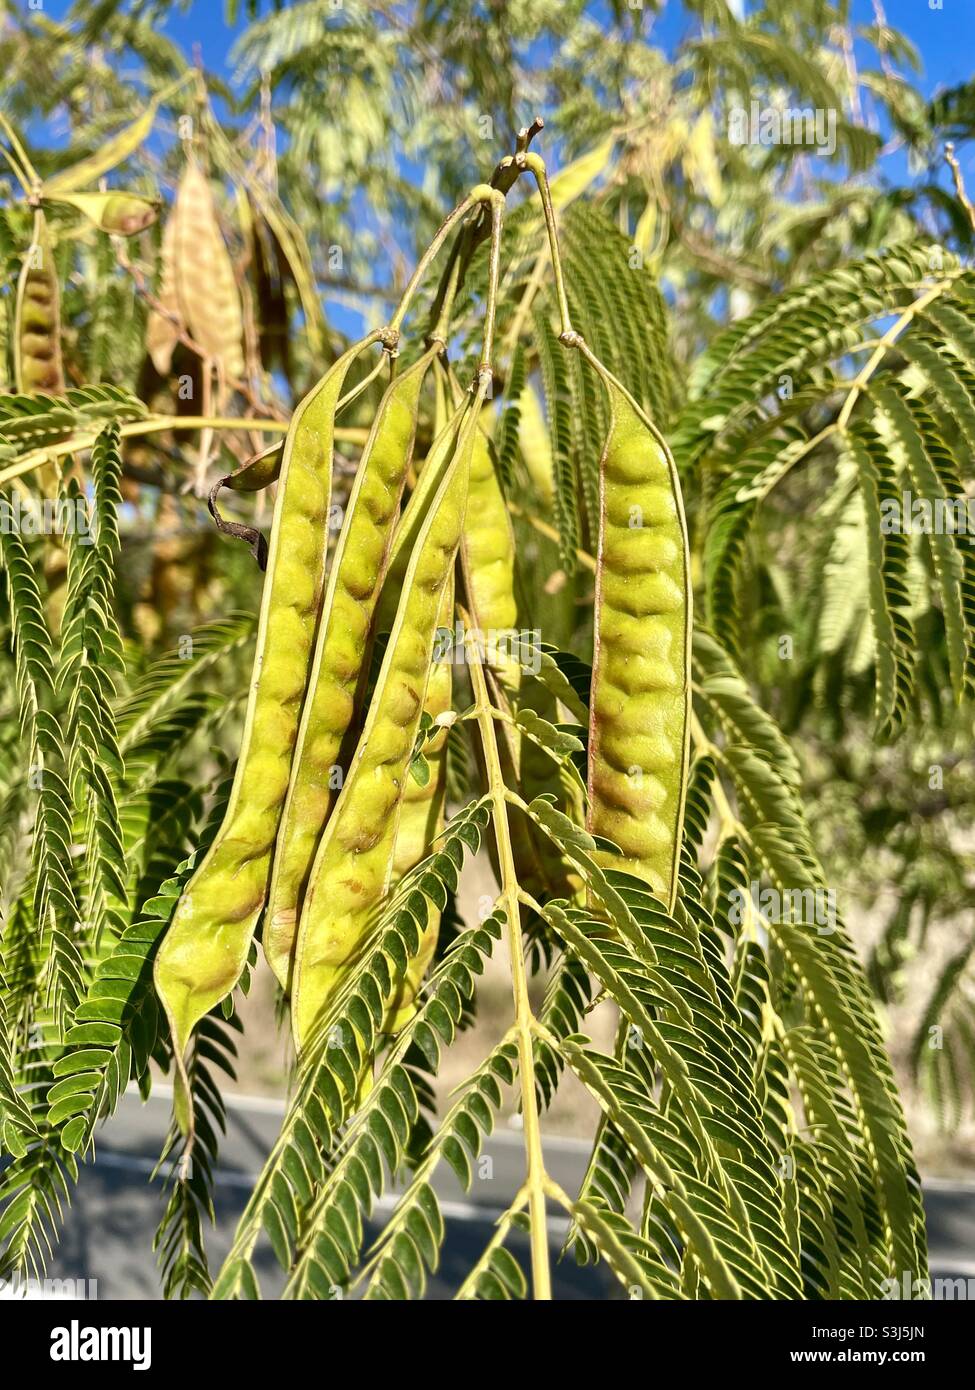 Seed pods and leaves of a Mimosa tree (Albizia julibrissin Stock Photo -  Alamy